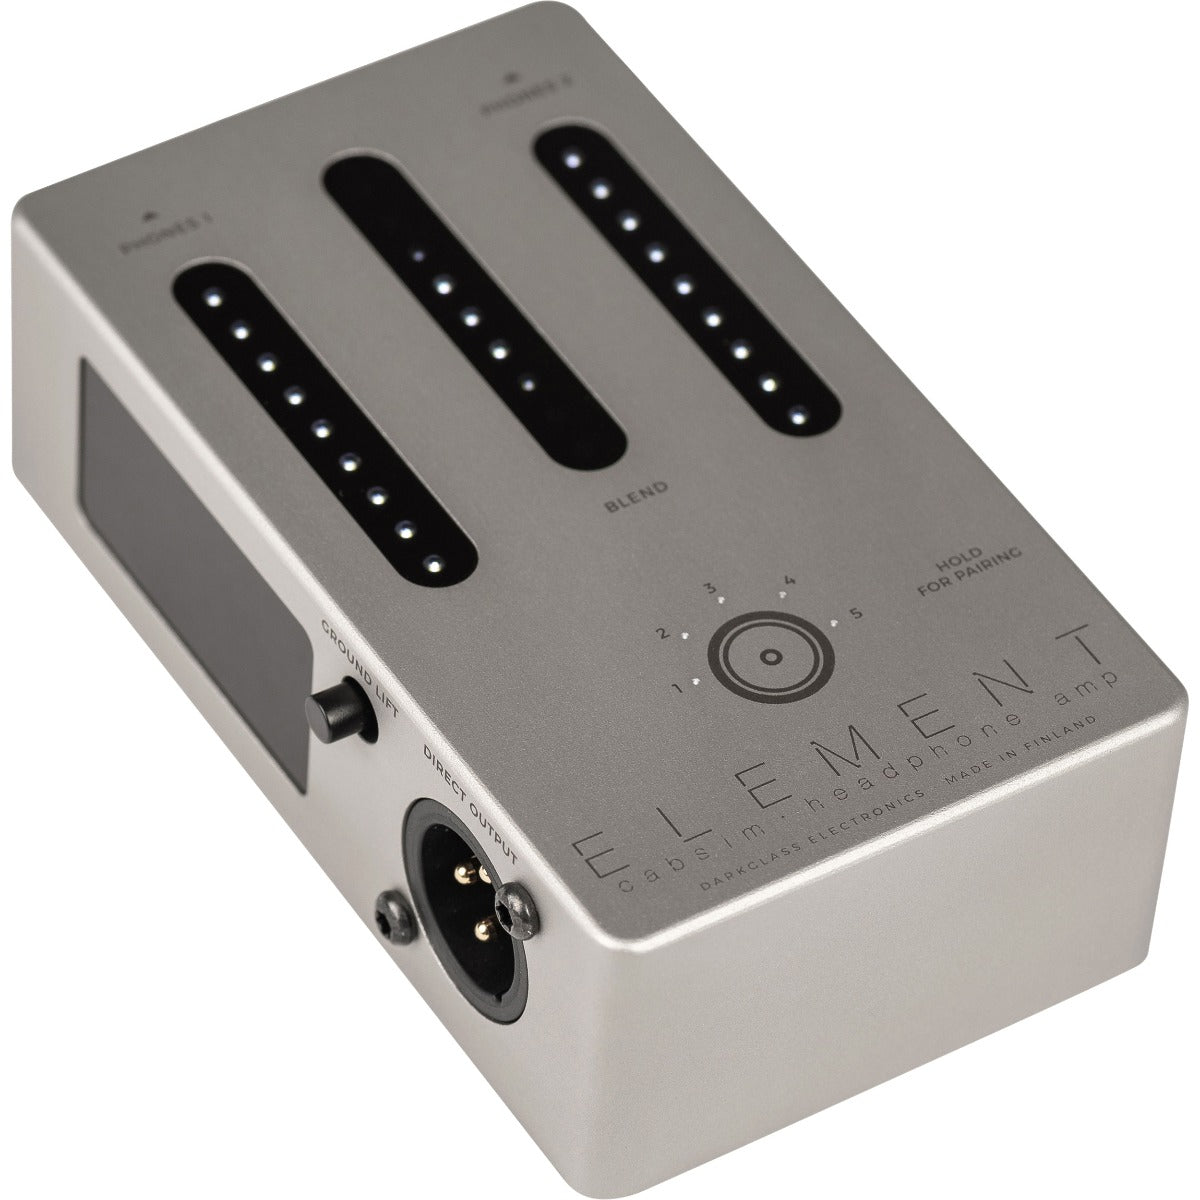 3/4 view of Darkglass Element Cabsim Headphone Amp showing top, left side and front